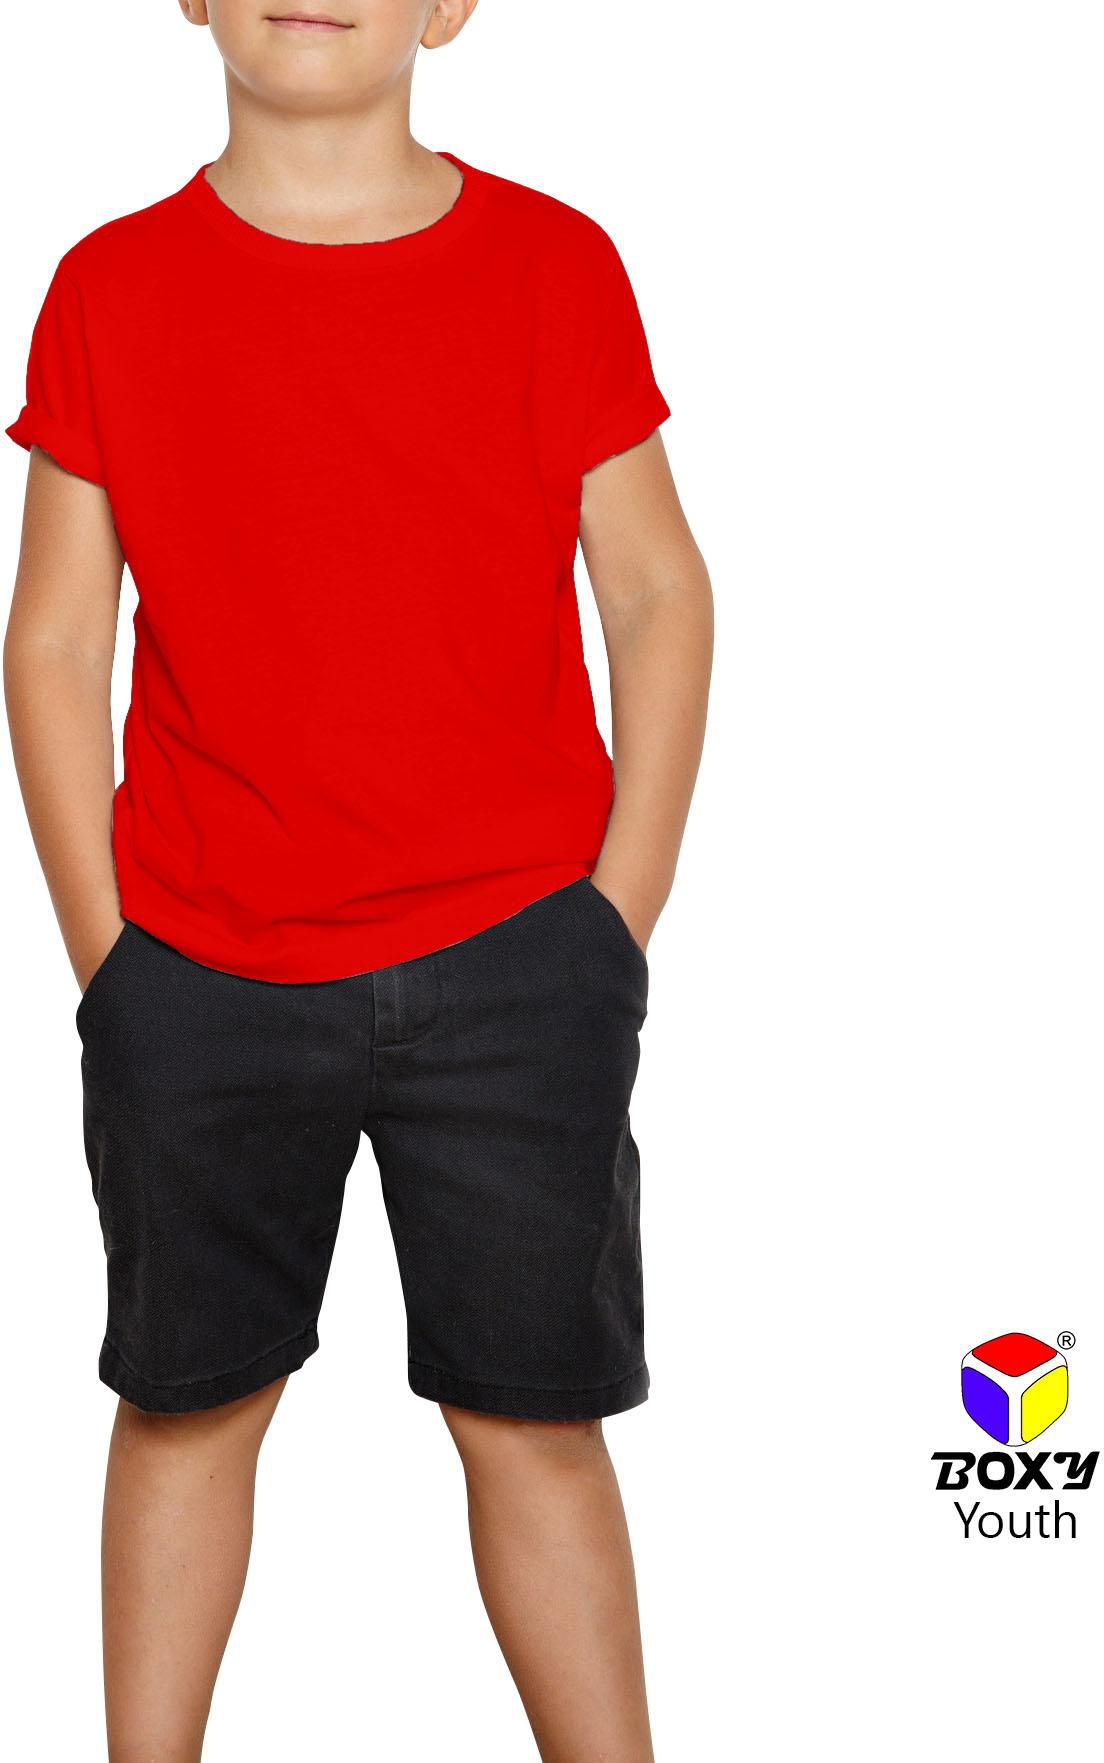 Boxy Youth Microfiber Round Neck T-shirt - 5 Sizes (Red)